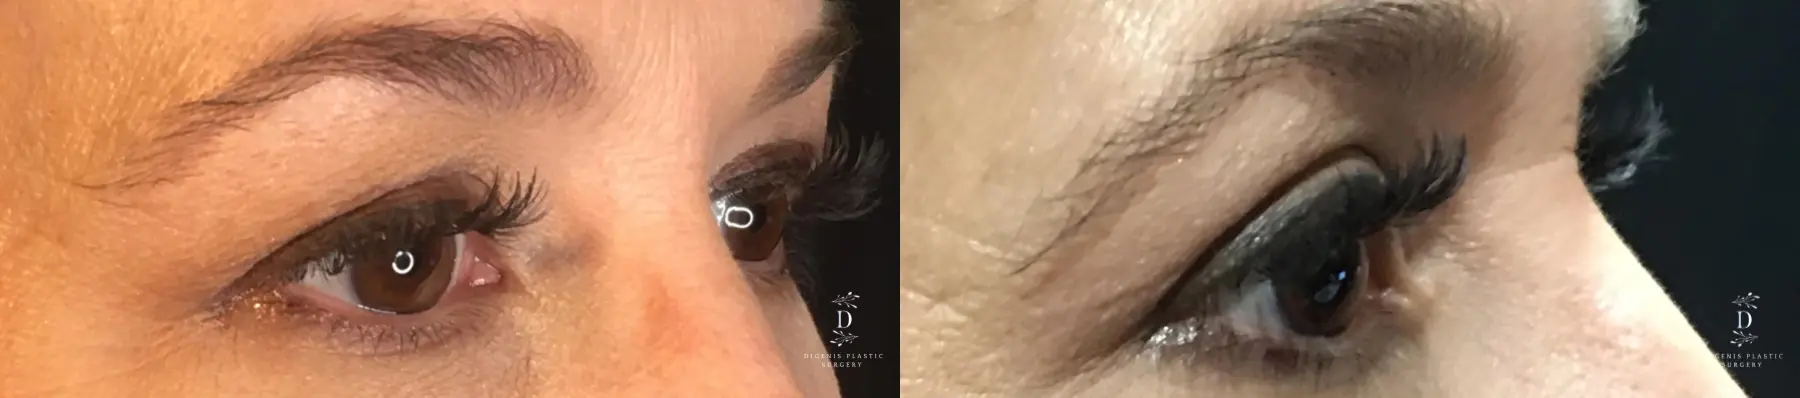 Eyelid Surgery: Patient 30 - Before and After 2